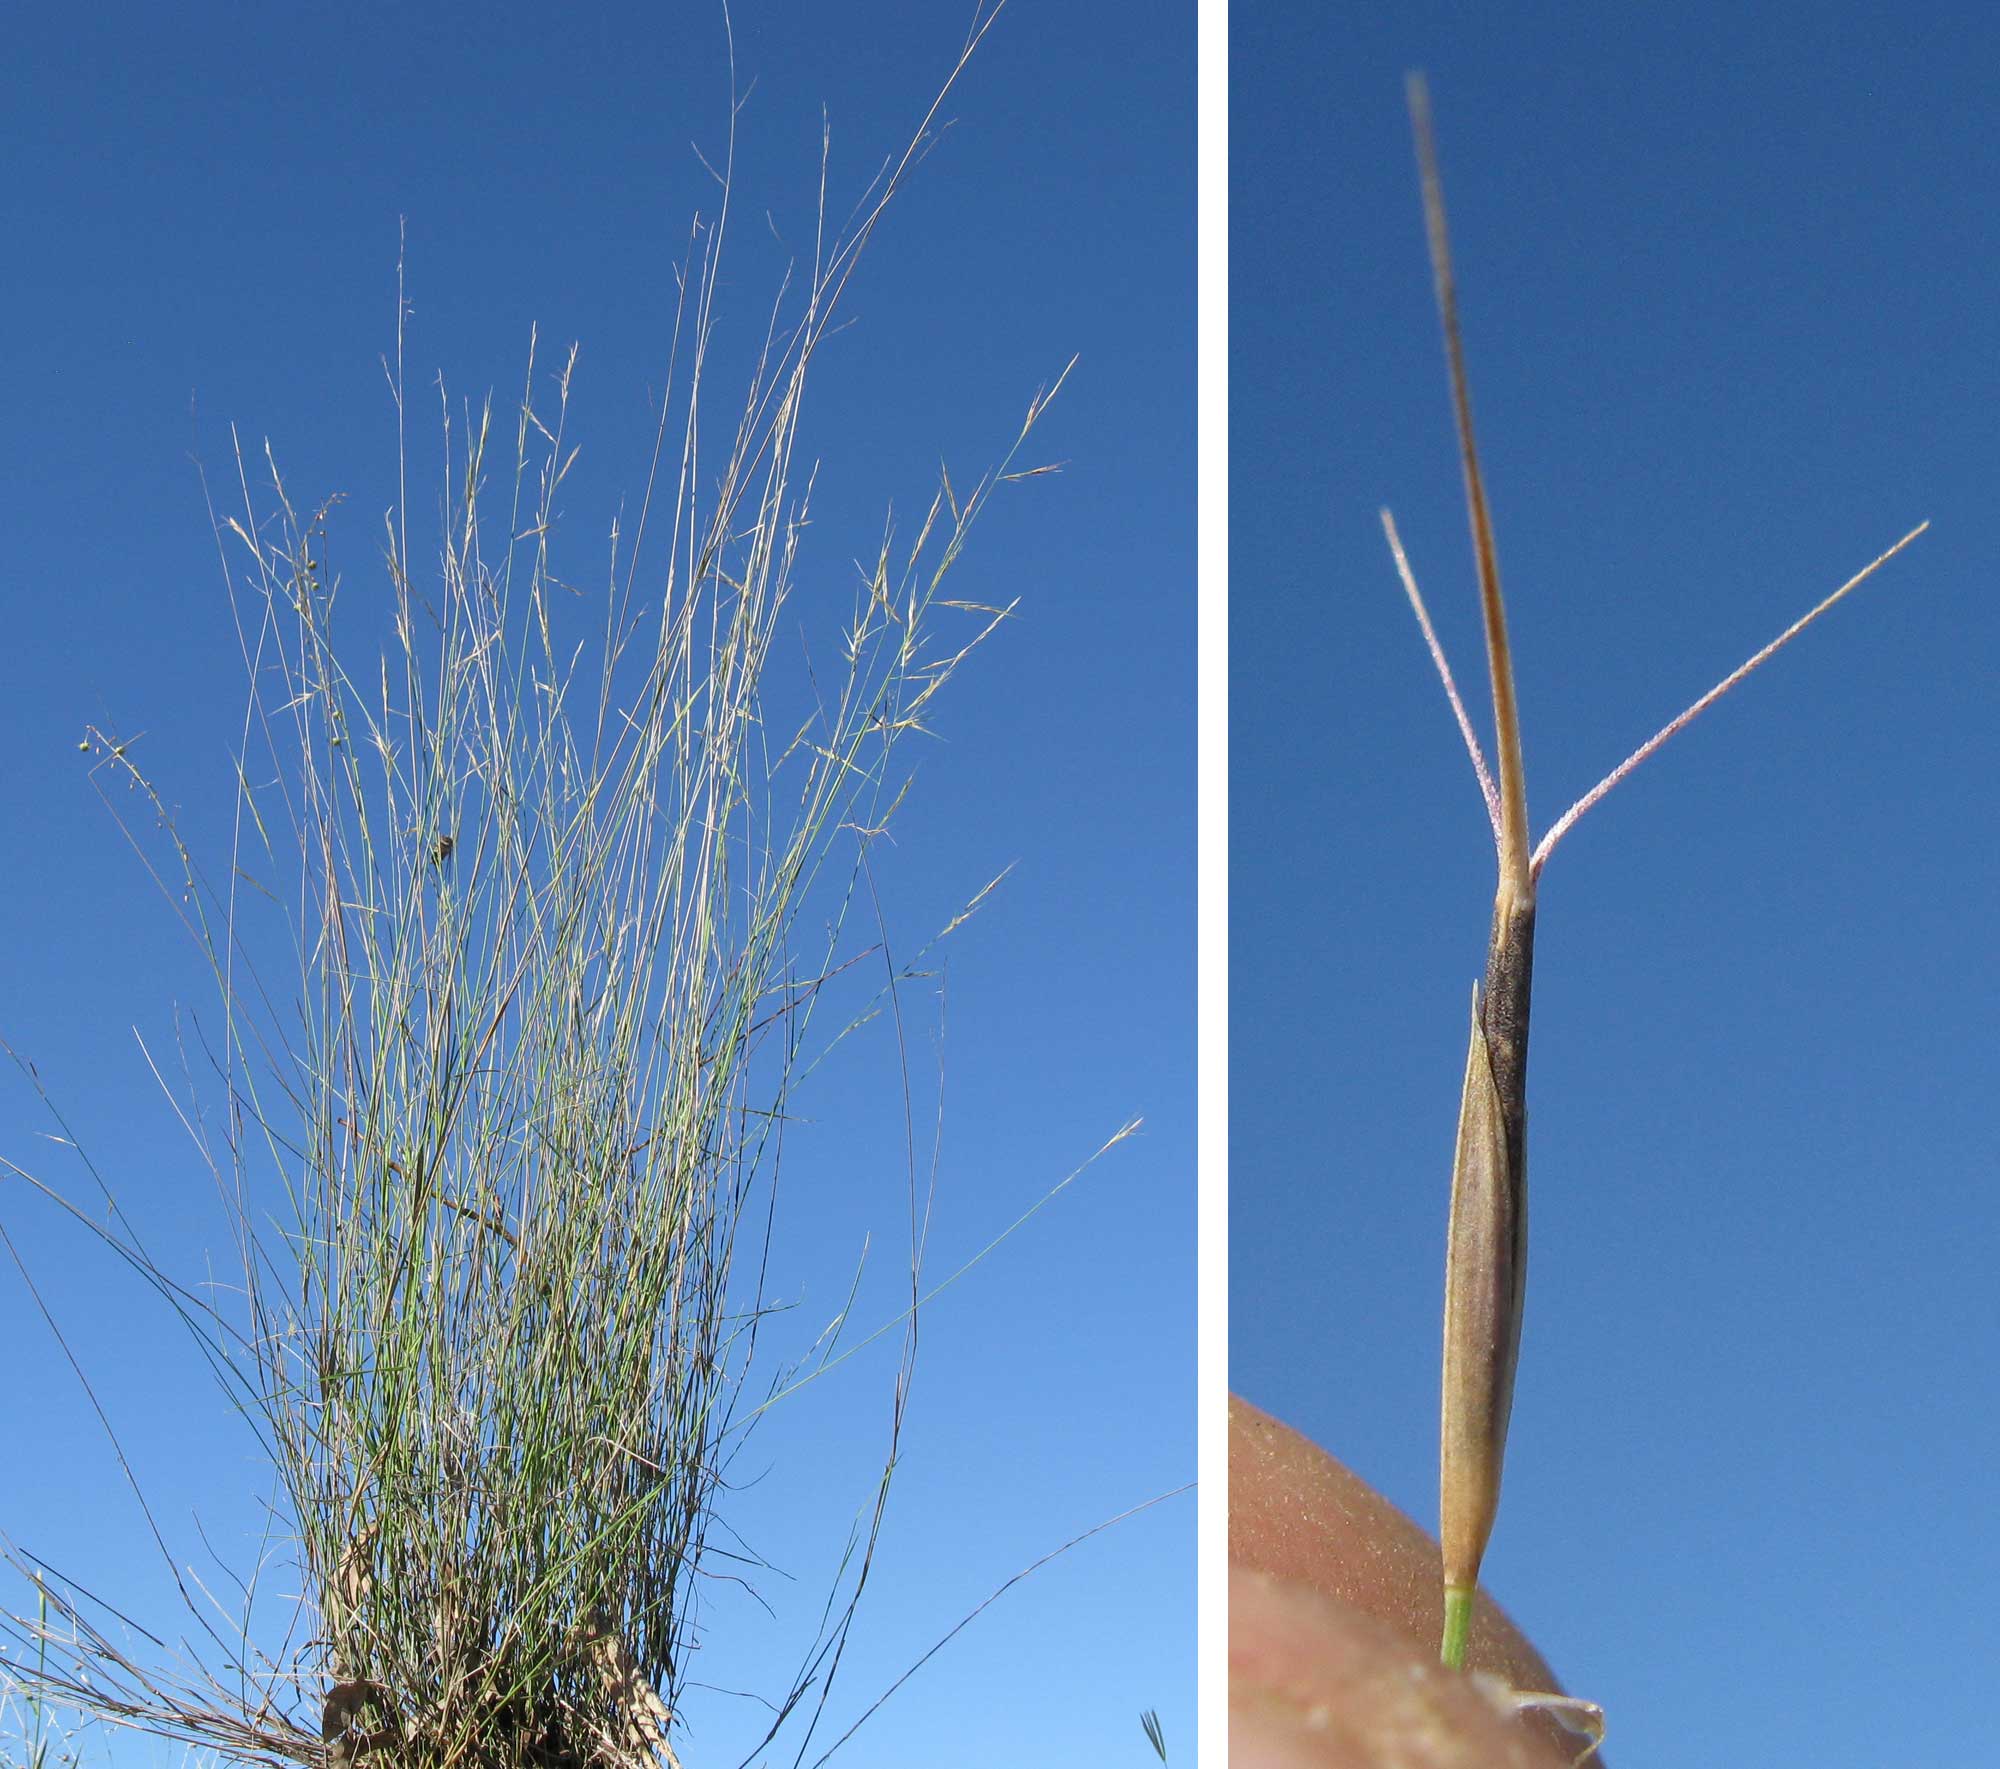 2-panel figure showing photographs of purple wire grass. Panel 1: Photograph of a clump of grass showing thin, spindly stems. Panel 2: Photograph of a single spikelet held between a person's thumb and forefinger. The spikelet has three awns, or long pointed extensions, each at about a 45-degree angle from the tip of the spikelet.